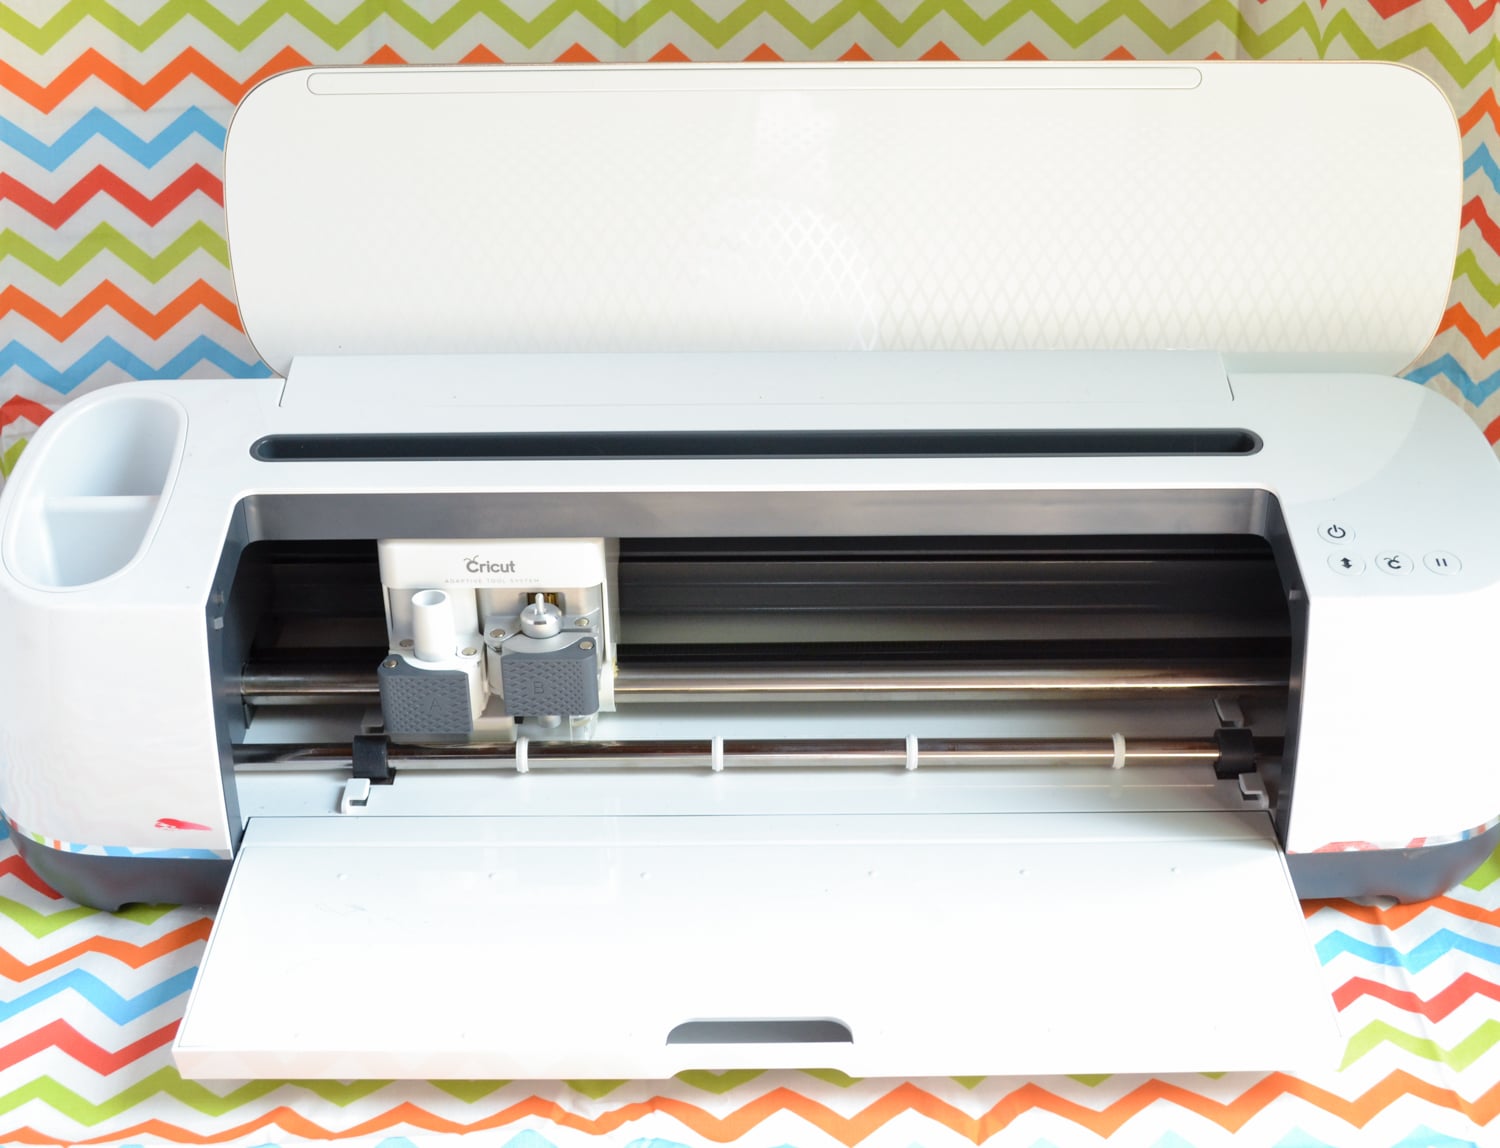 What Vinyl Do I Use With Cricut - Tastefully Frugal